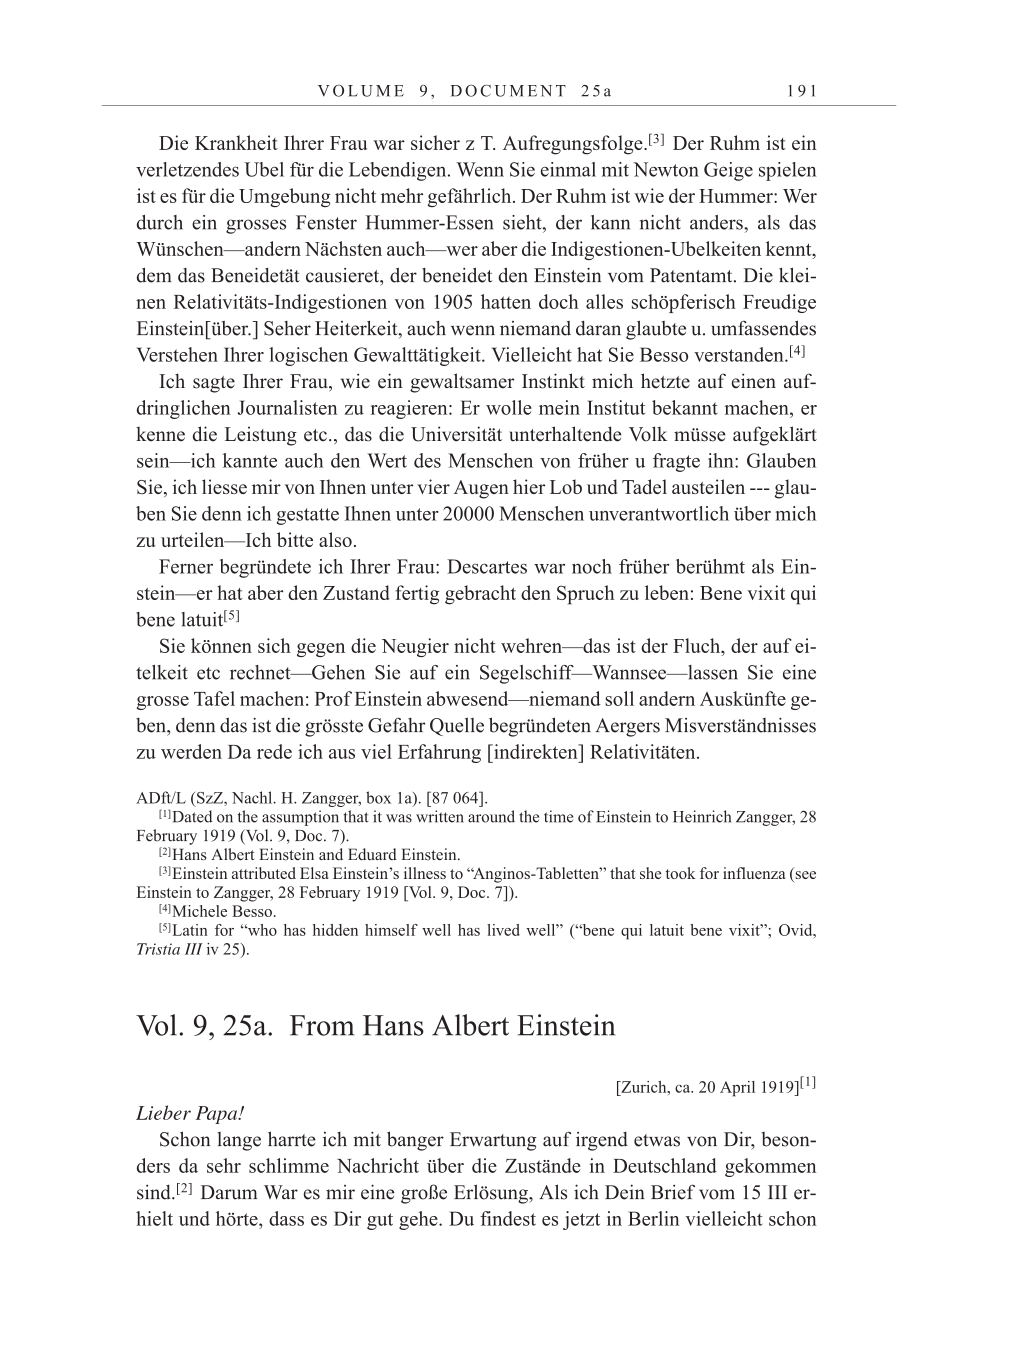 Volume 10: The Berlin Years: Correspondence May-December 1920 / Supplementary Correspondence 1909-1920 page 191